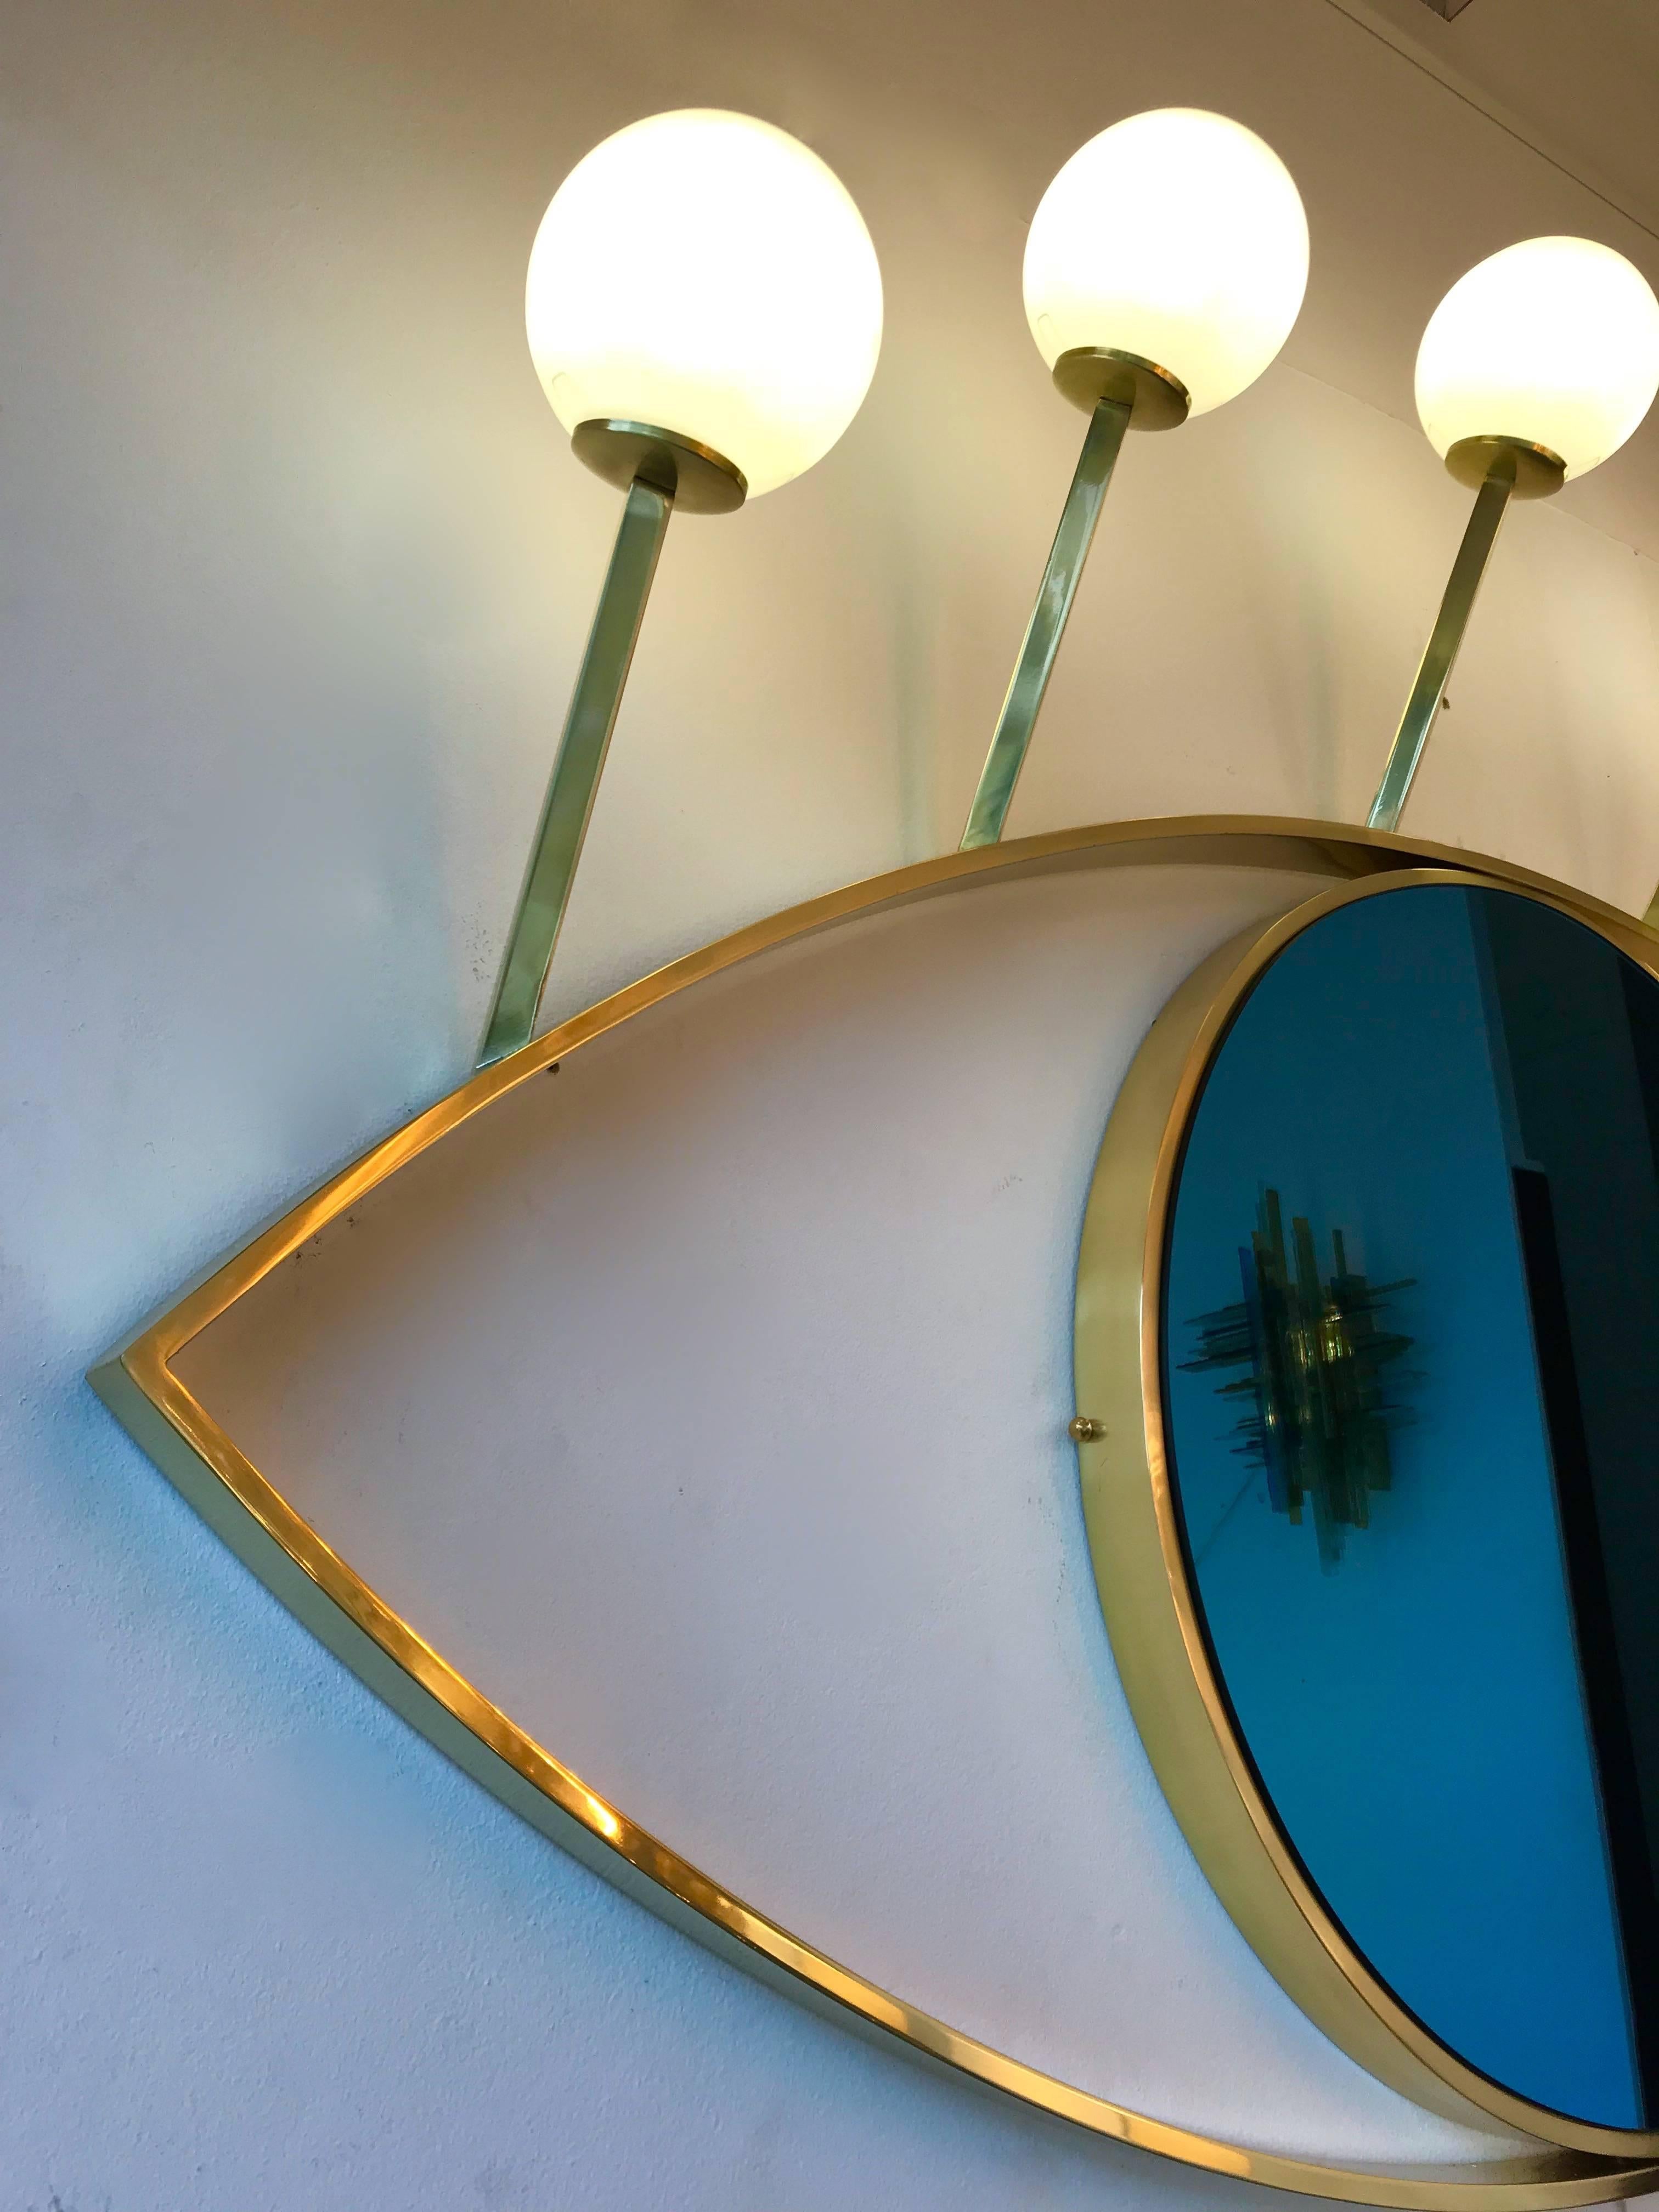 Blue eyes full brass lightning mirror with sconces. Opaline glass ball. Few exclusive production on order from a small artisanal Italian workshop.